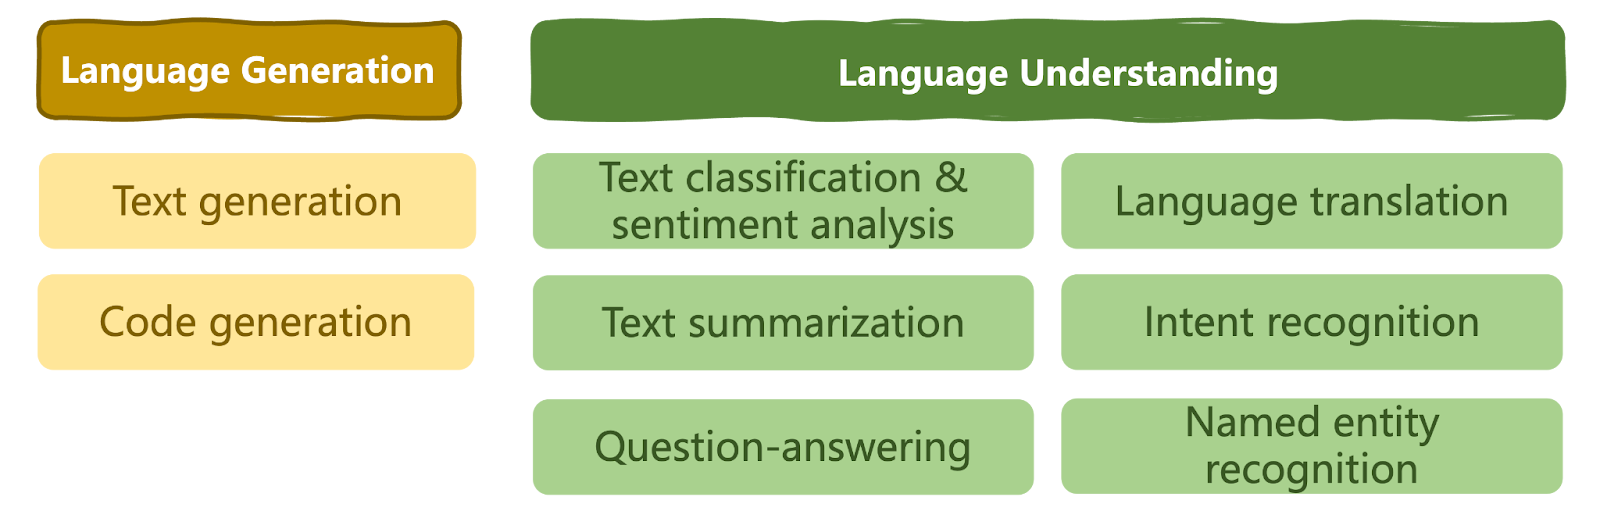 A taxonomy of solvable language tasks by LLMs